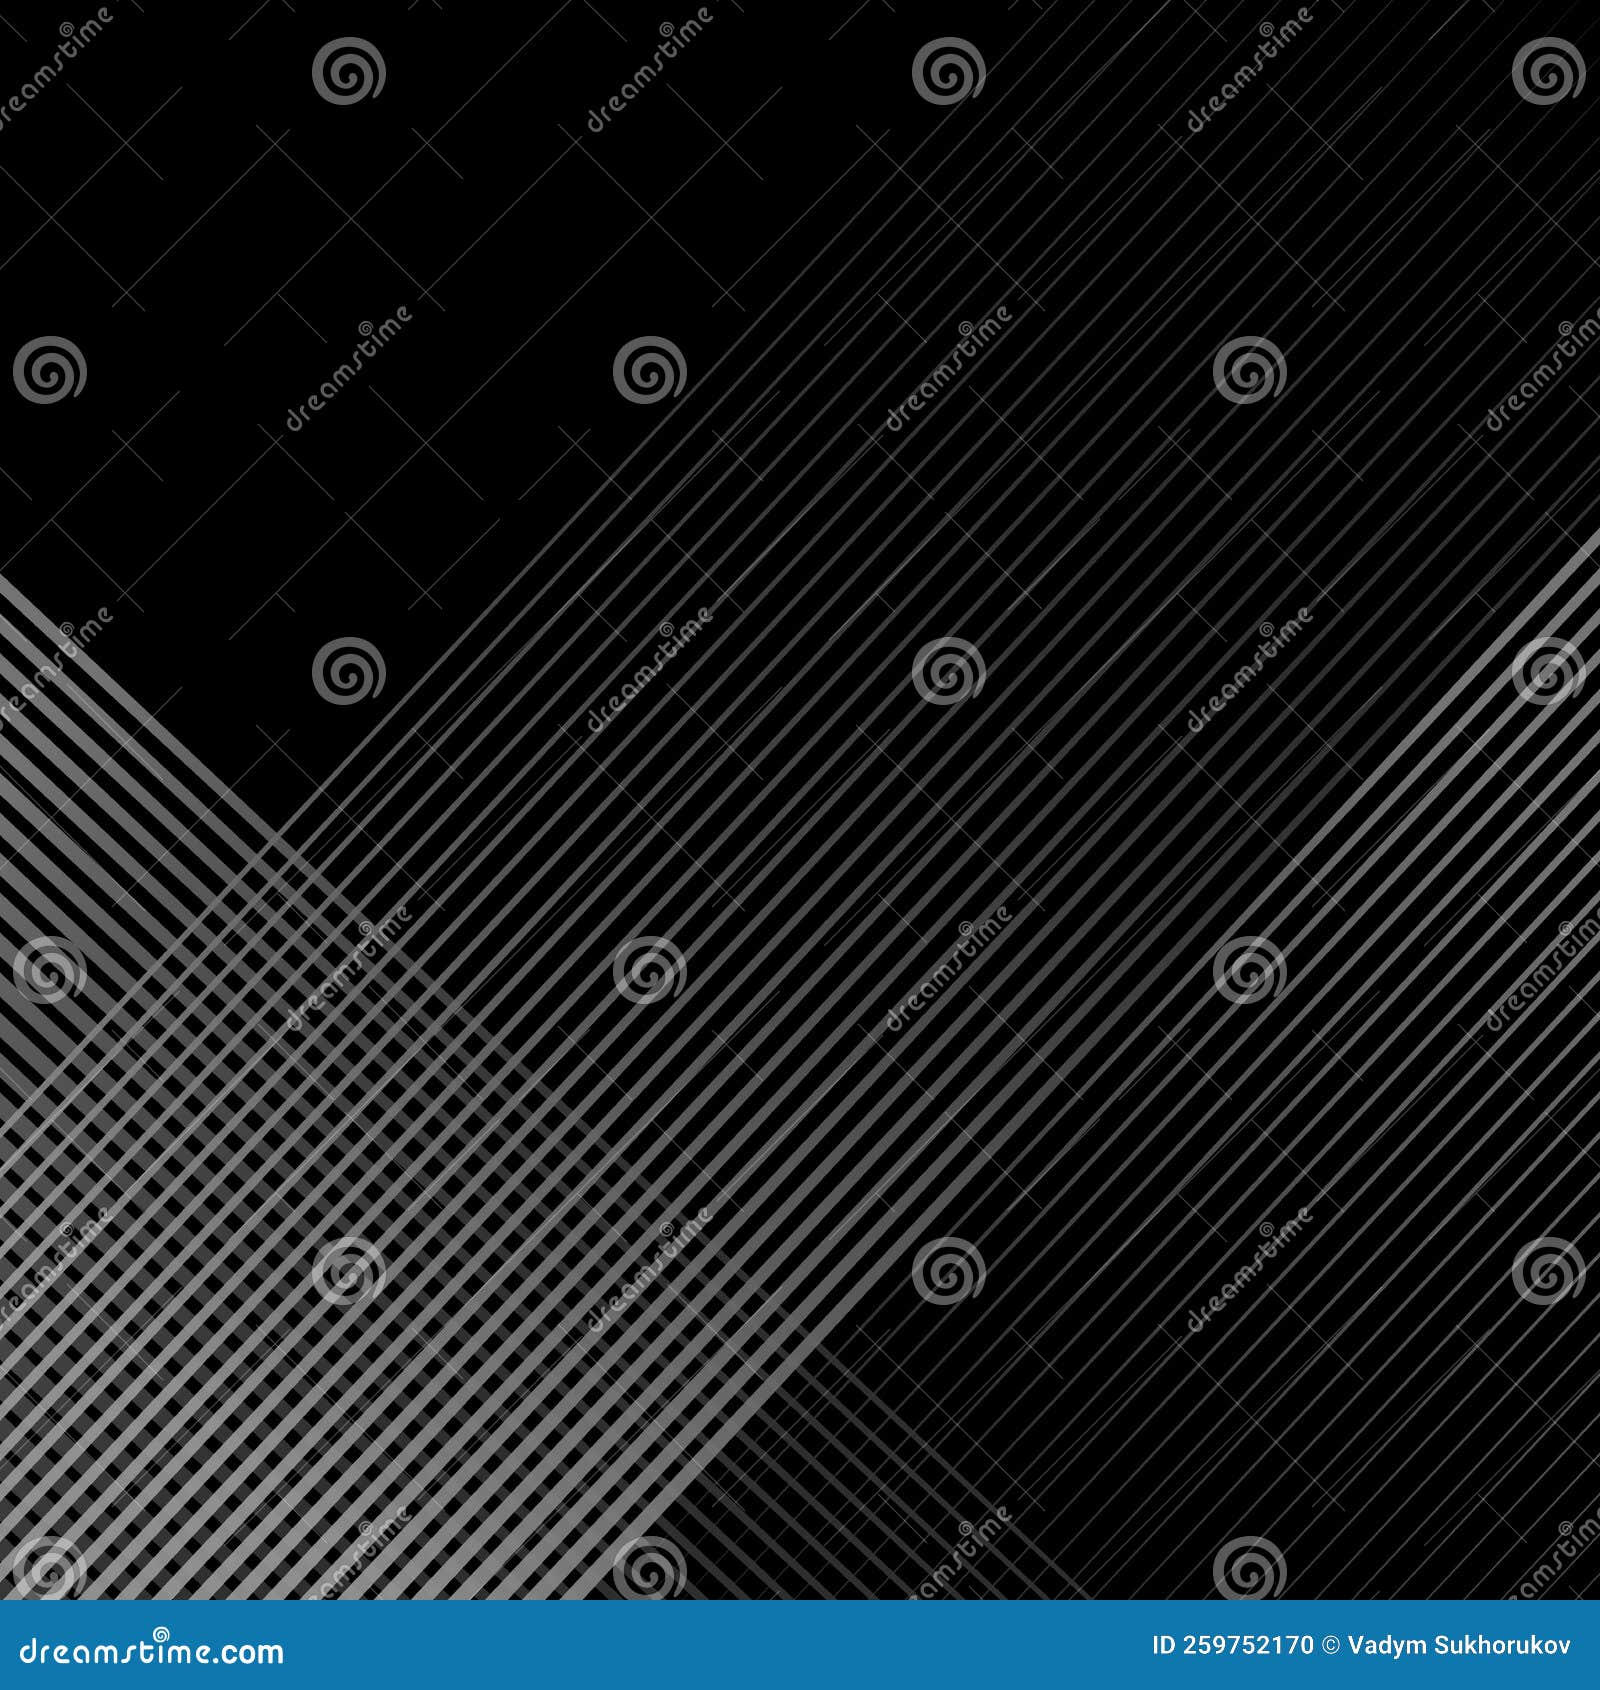 elegent black abstract background with diagonal lines